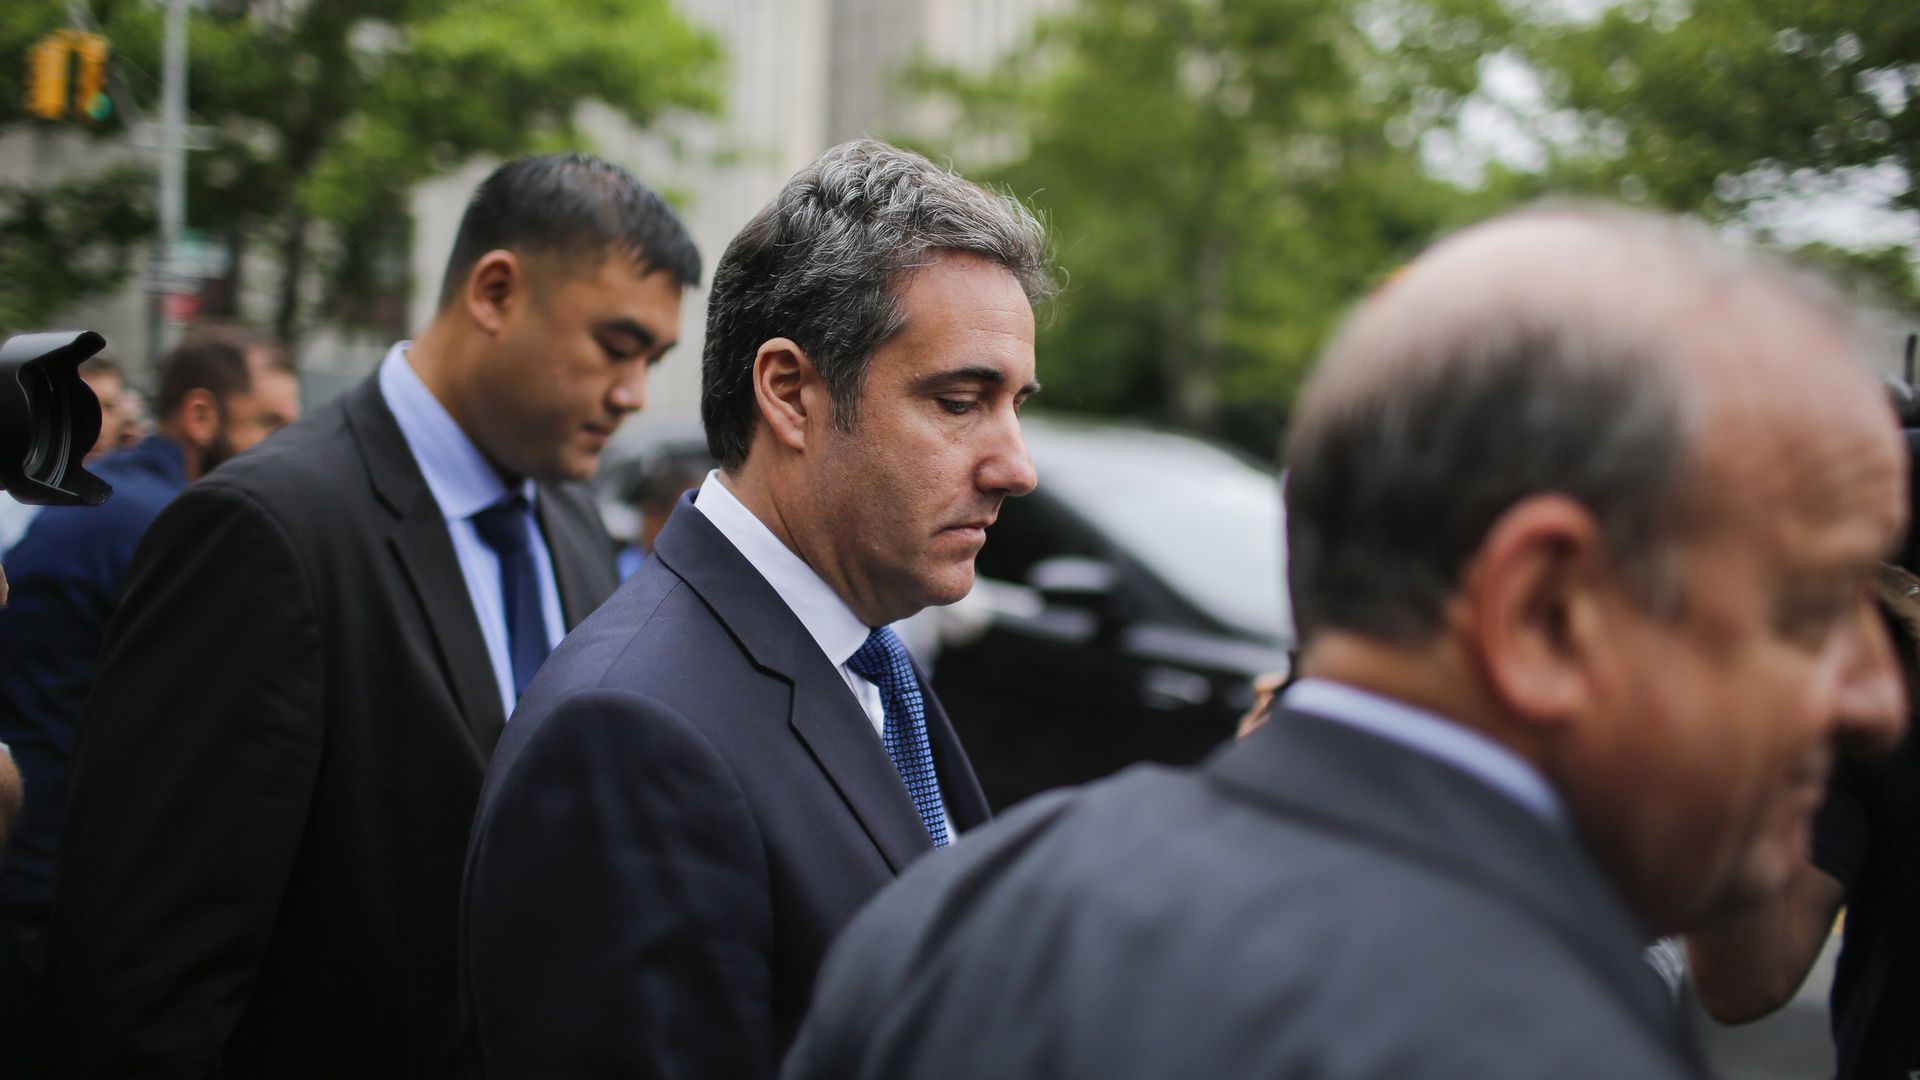 Michael Cohen looks down as he's escorted out of a courthosue